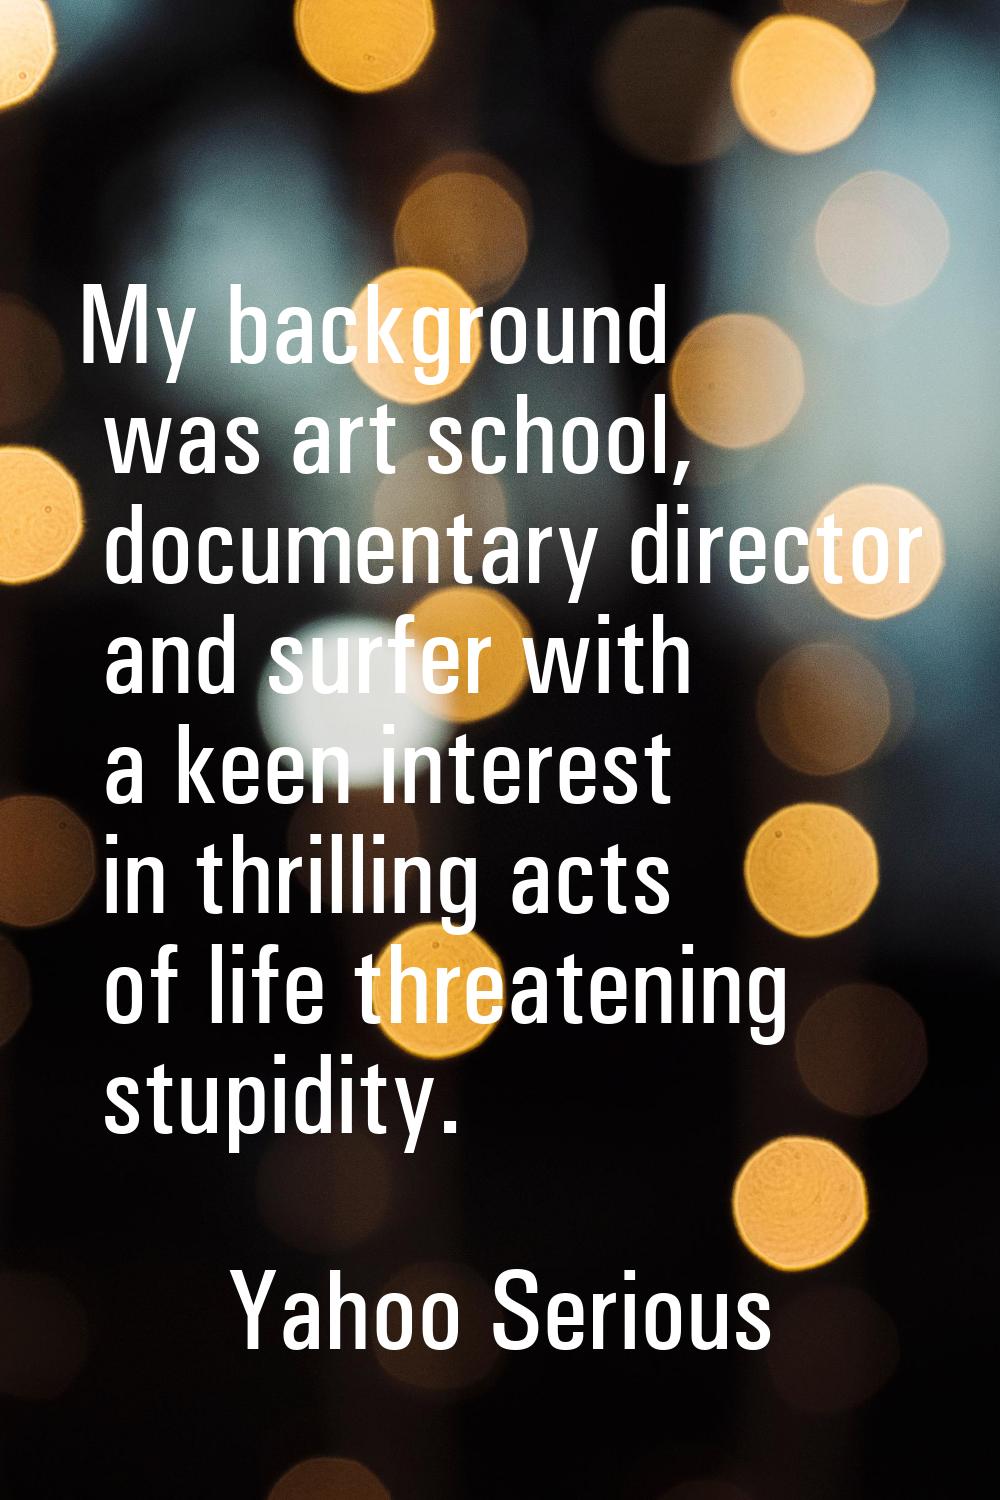 My background was art school, documentary director and surfer with a keen interest in thrilling act